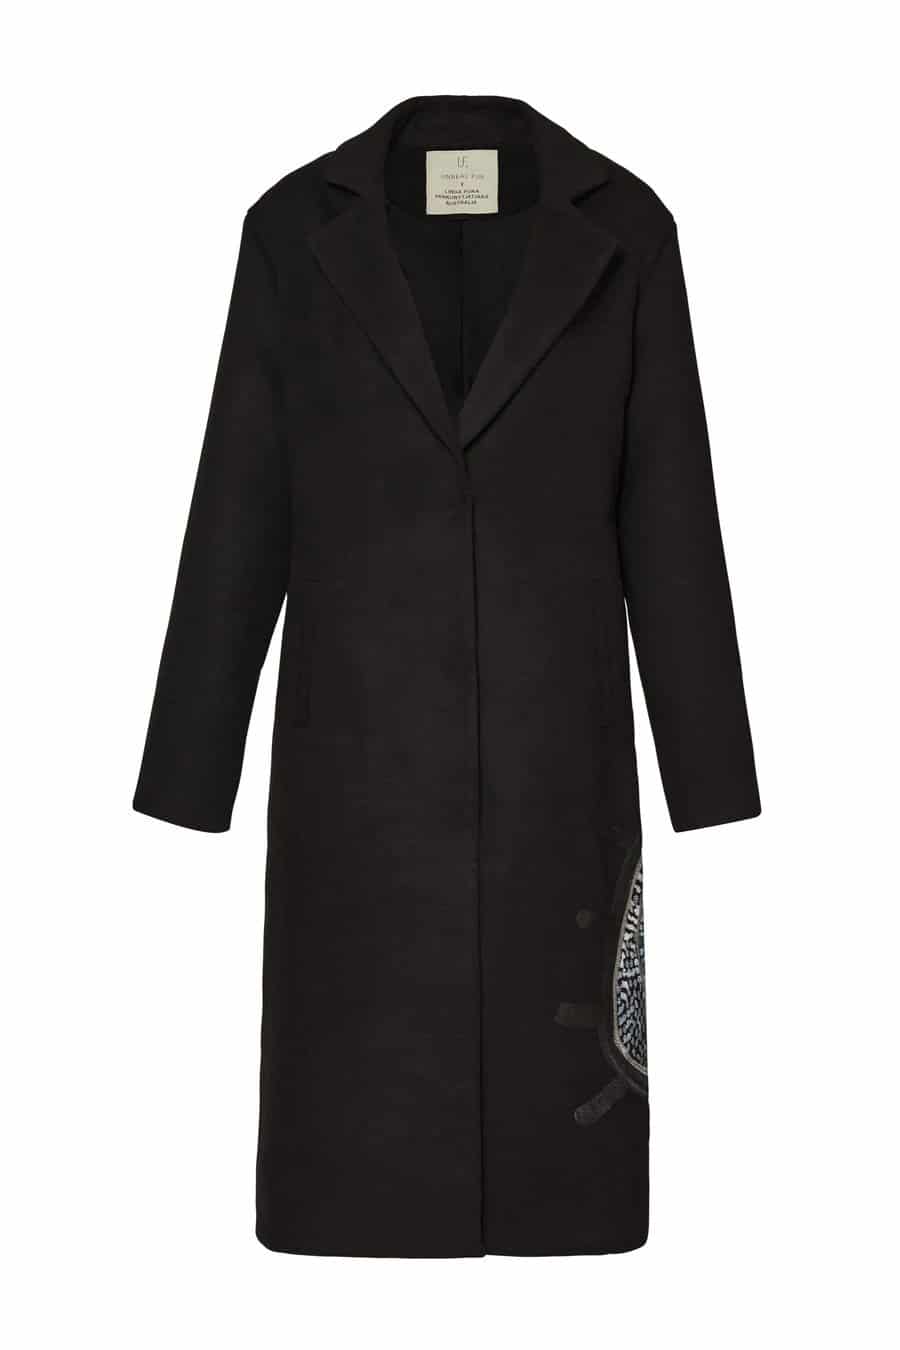 Unreal Fur black vegan wool coat with embroidery on the back, front shown only